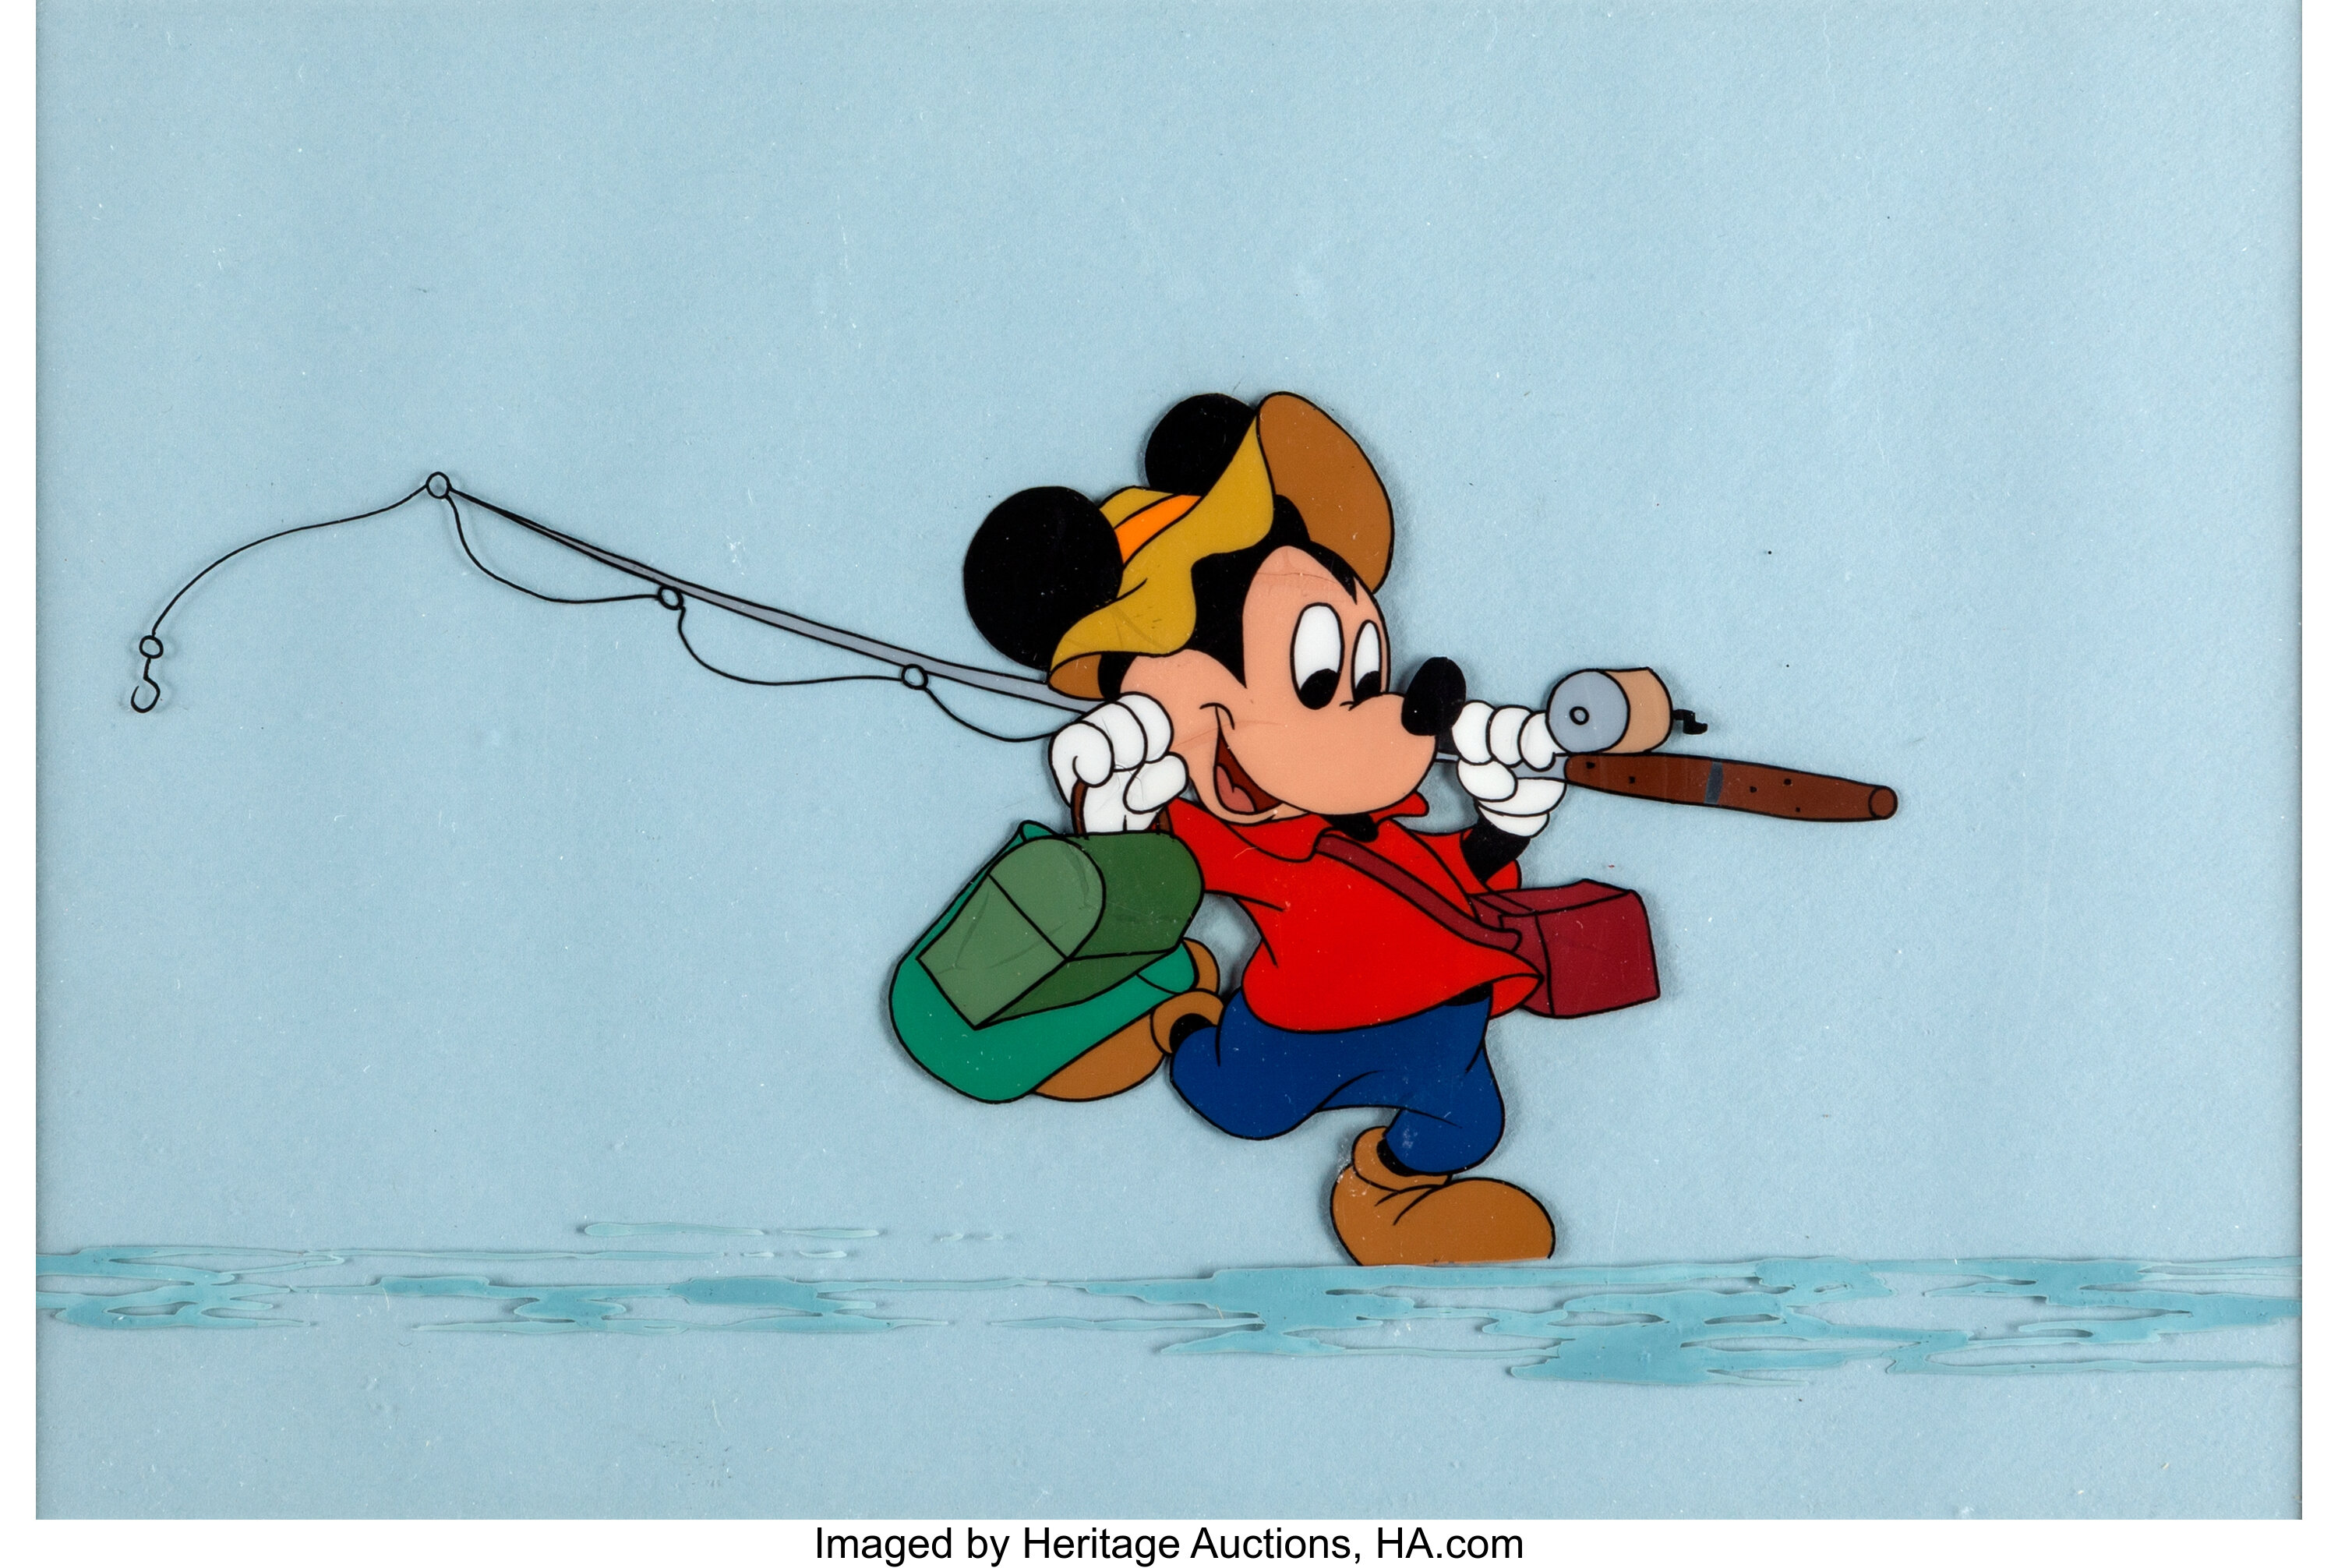 Mickey Mouse - Fishing for the simple pleasures this summer